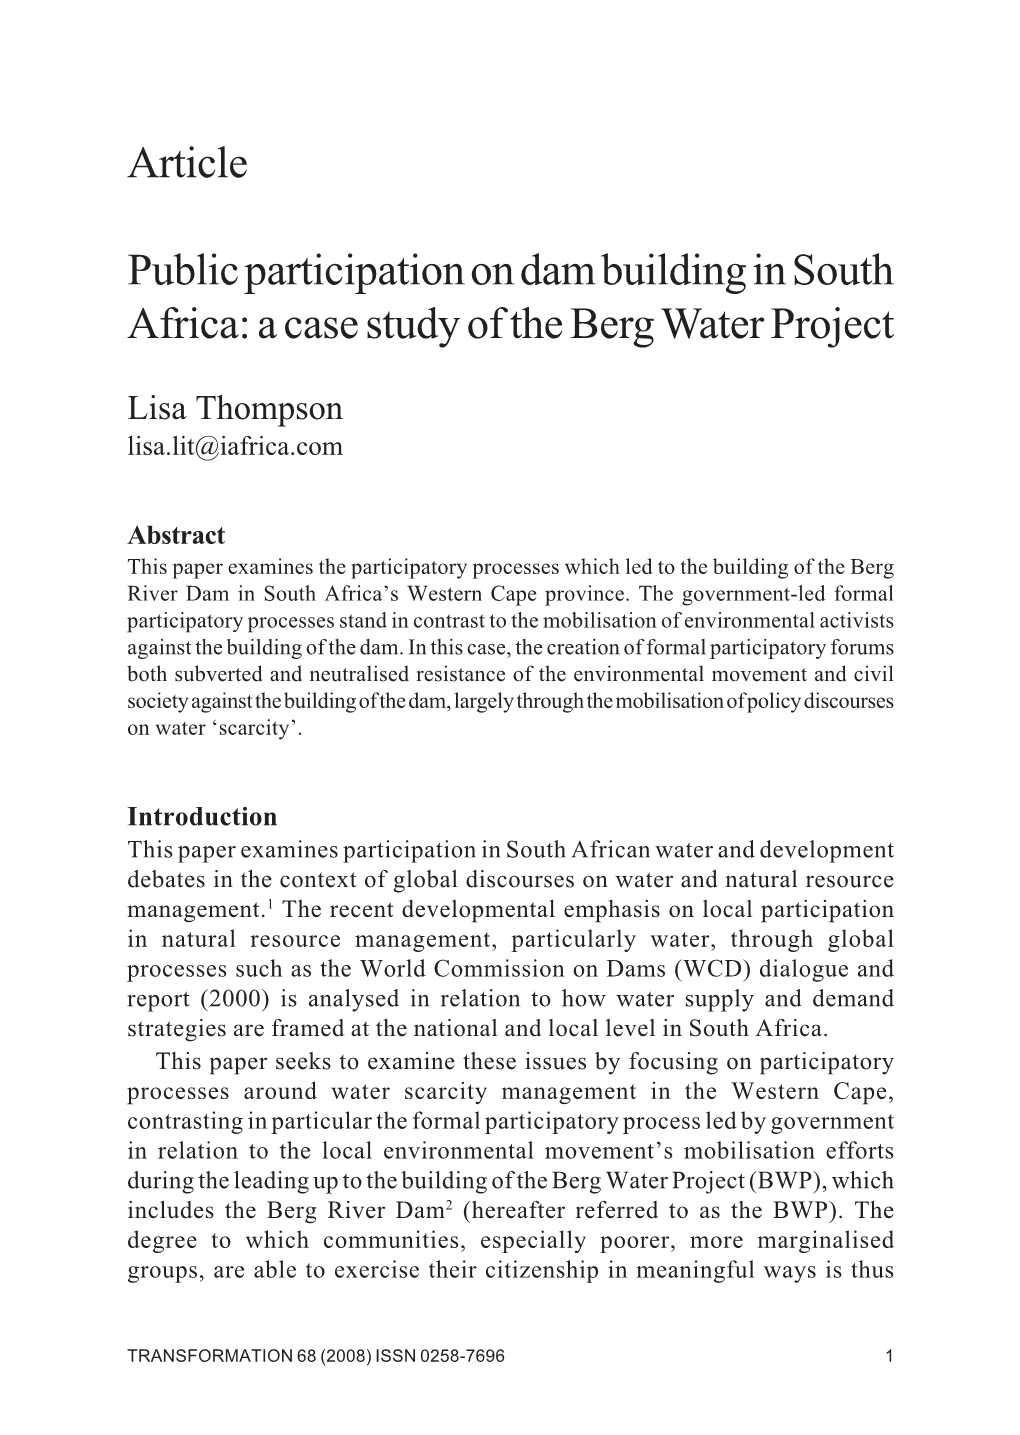 Article Public Participation on Dam Building in South Africa: a Case